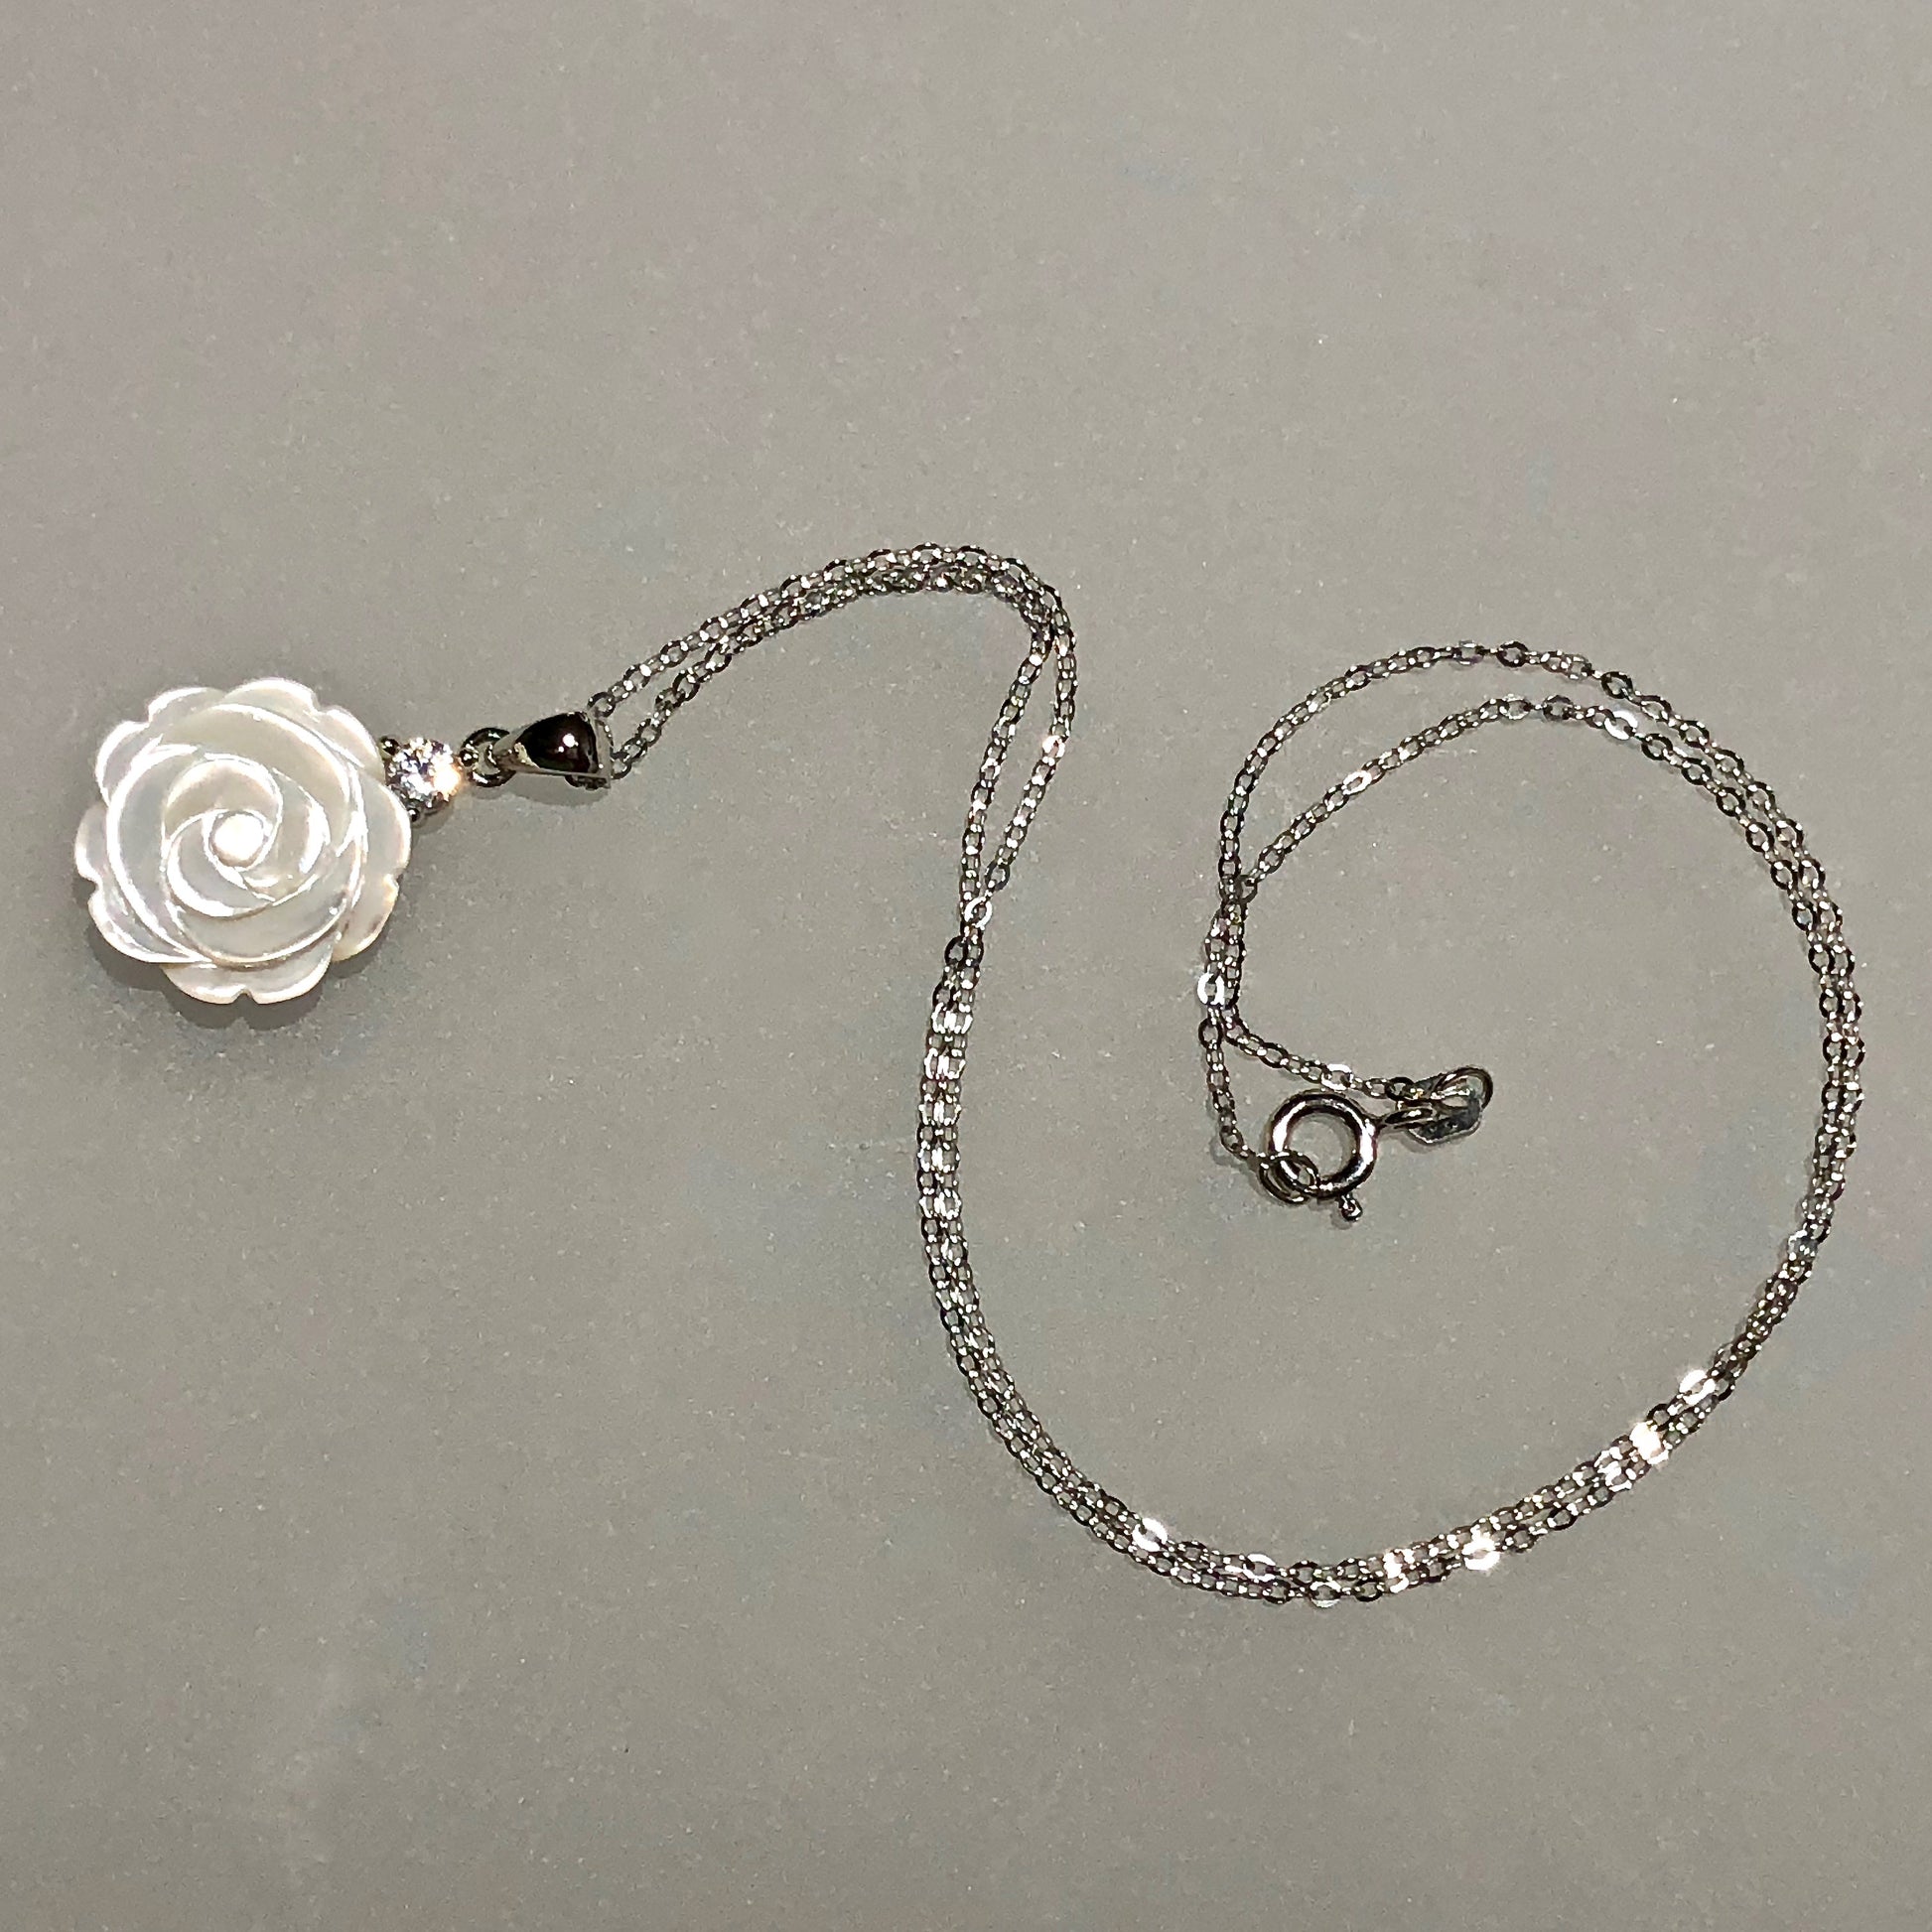 15mm White Mother of Pearl Rose Carved Pendant with CZ on Sterling Chain / Arpaia Jewelry